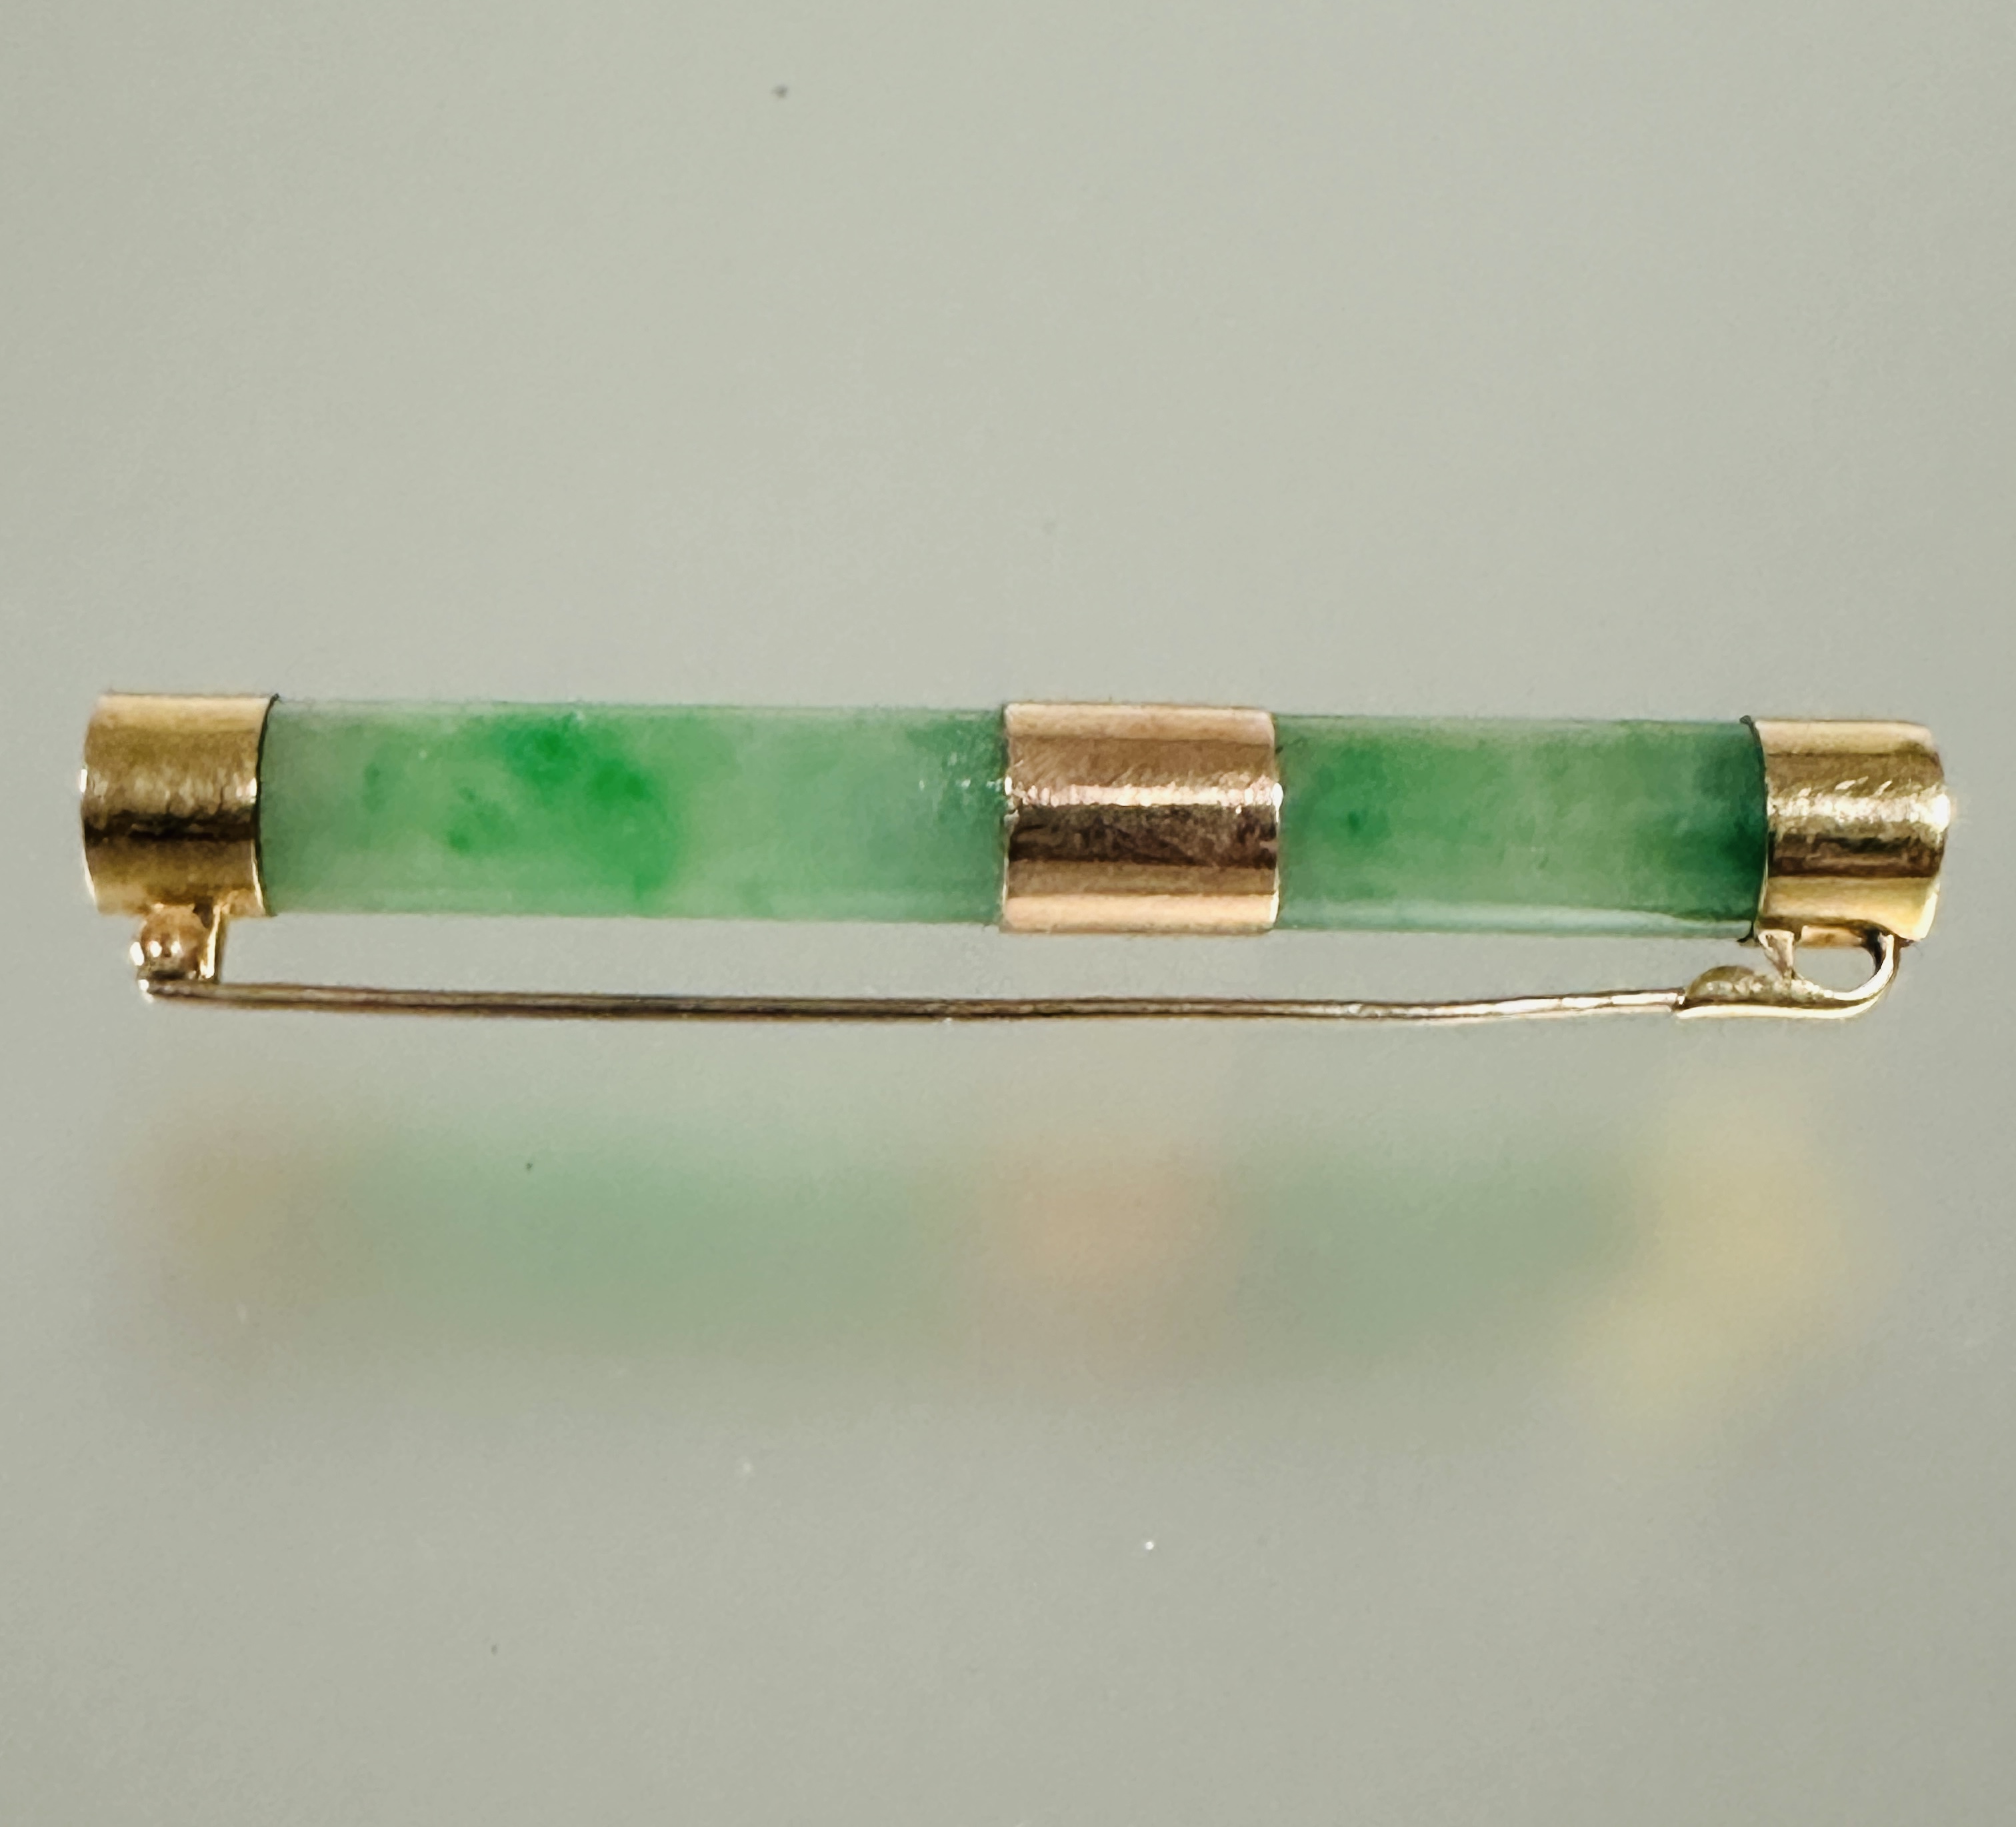 A Chinese 22ct gold mounted celadon jadeite barrel brooch with original clasp fastening shows no - Image 3 of 4